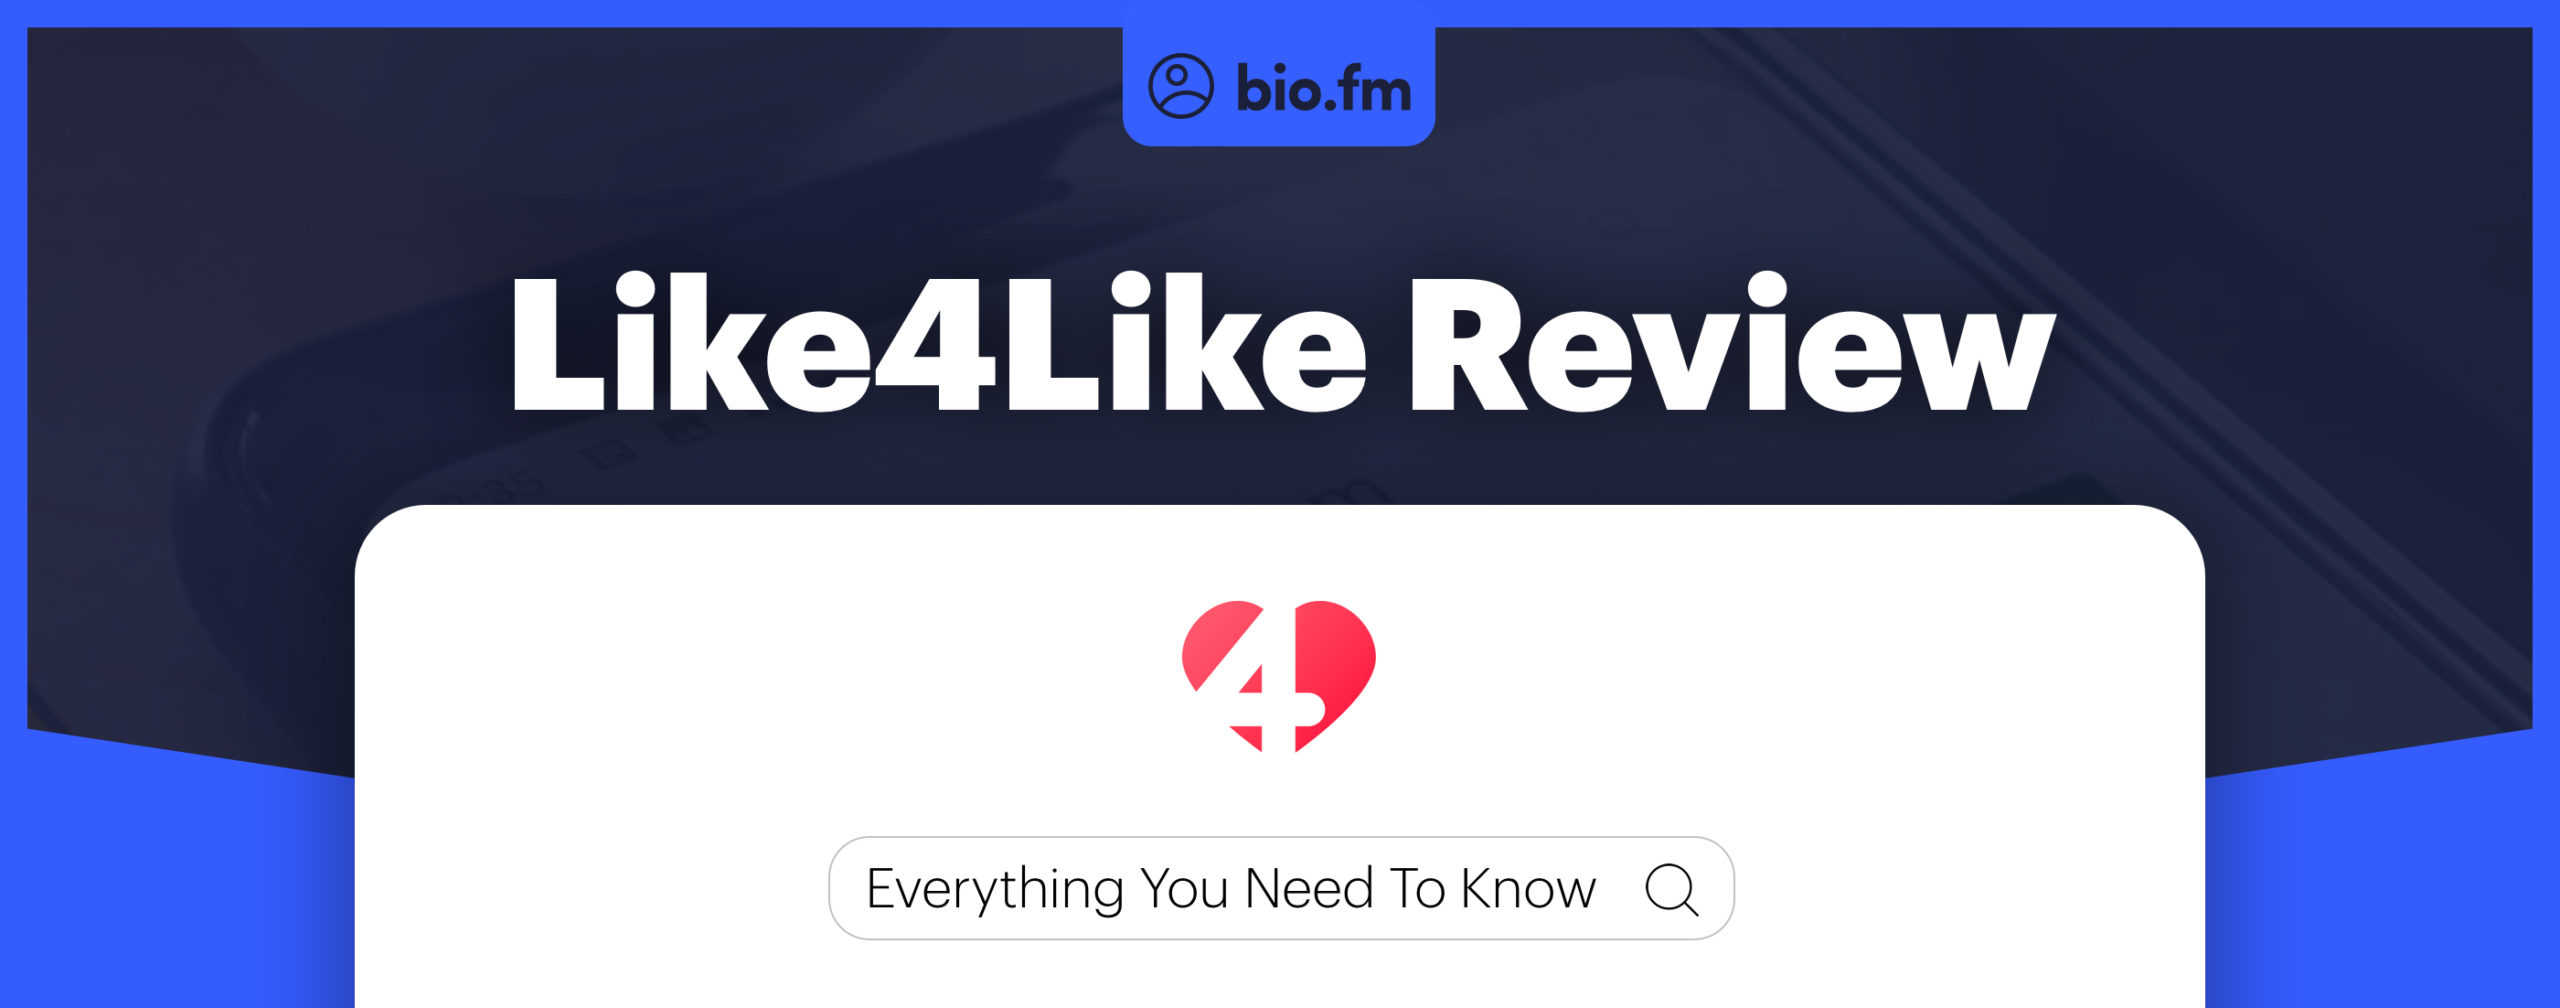 like4like review featured image